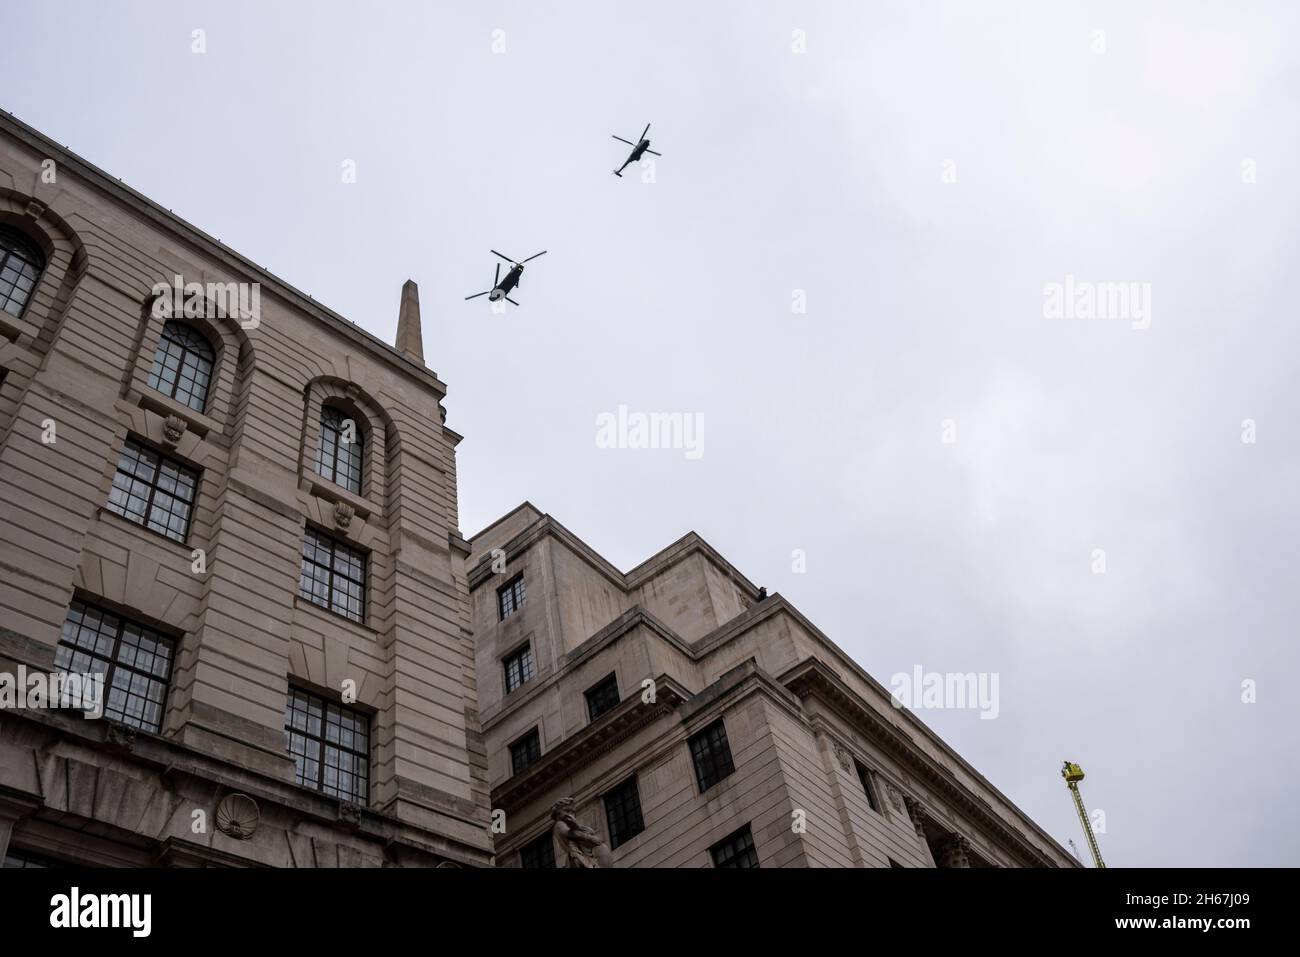 RAF Puma and Chinook helicopter flypast at the Lord Mayor's Show, Parade, procession passing along Poultry, near Mansion House, London, UK Stock Photo